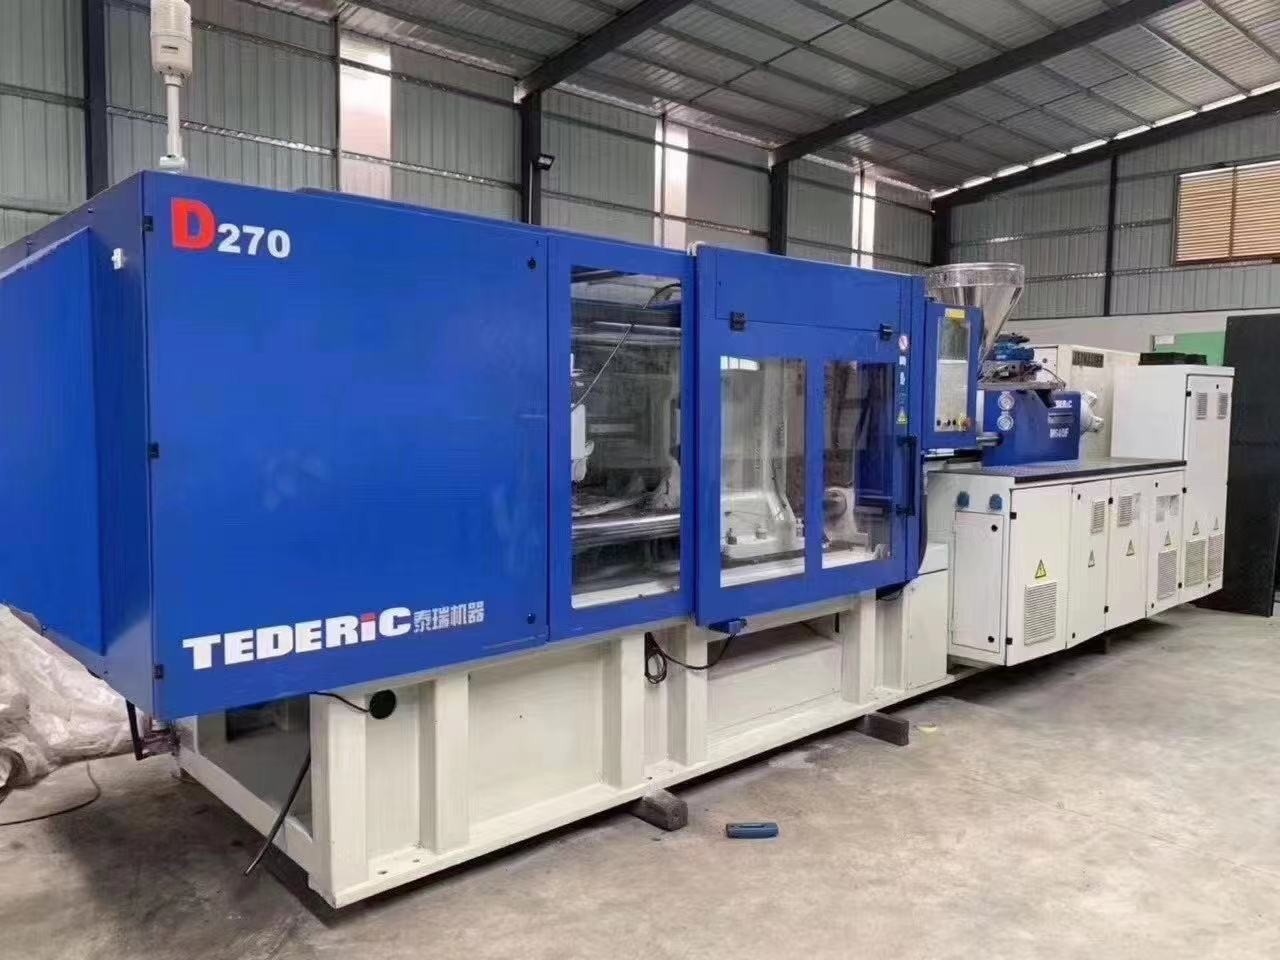  270 Ton Hydraulic Plastic Injection Moulding Machine Second Hand Tederic D270/M640 Manufactures